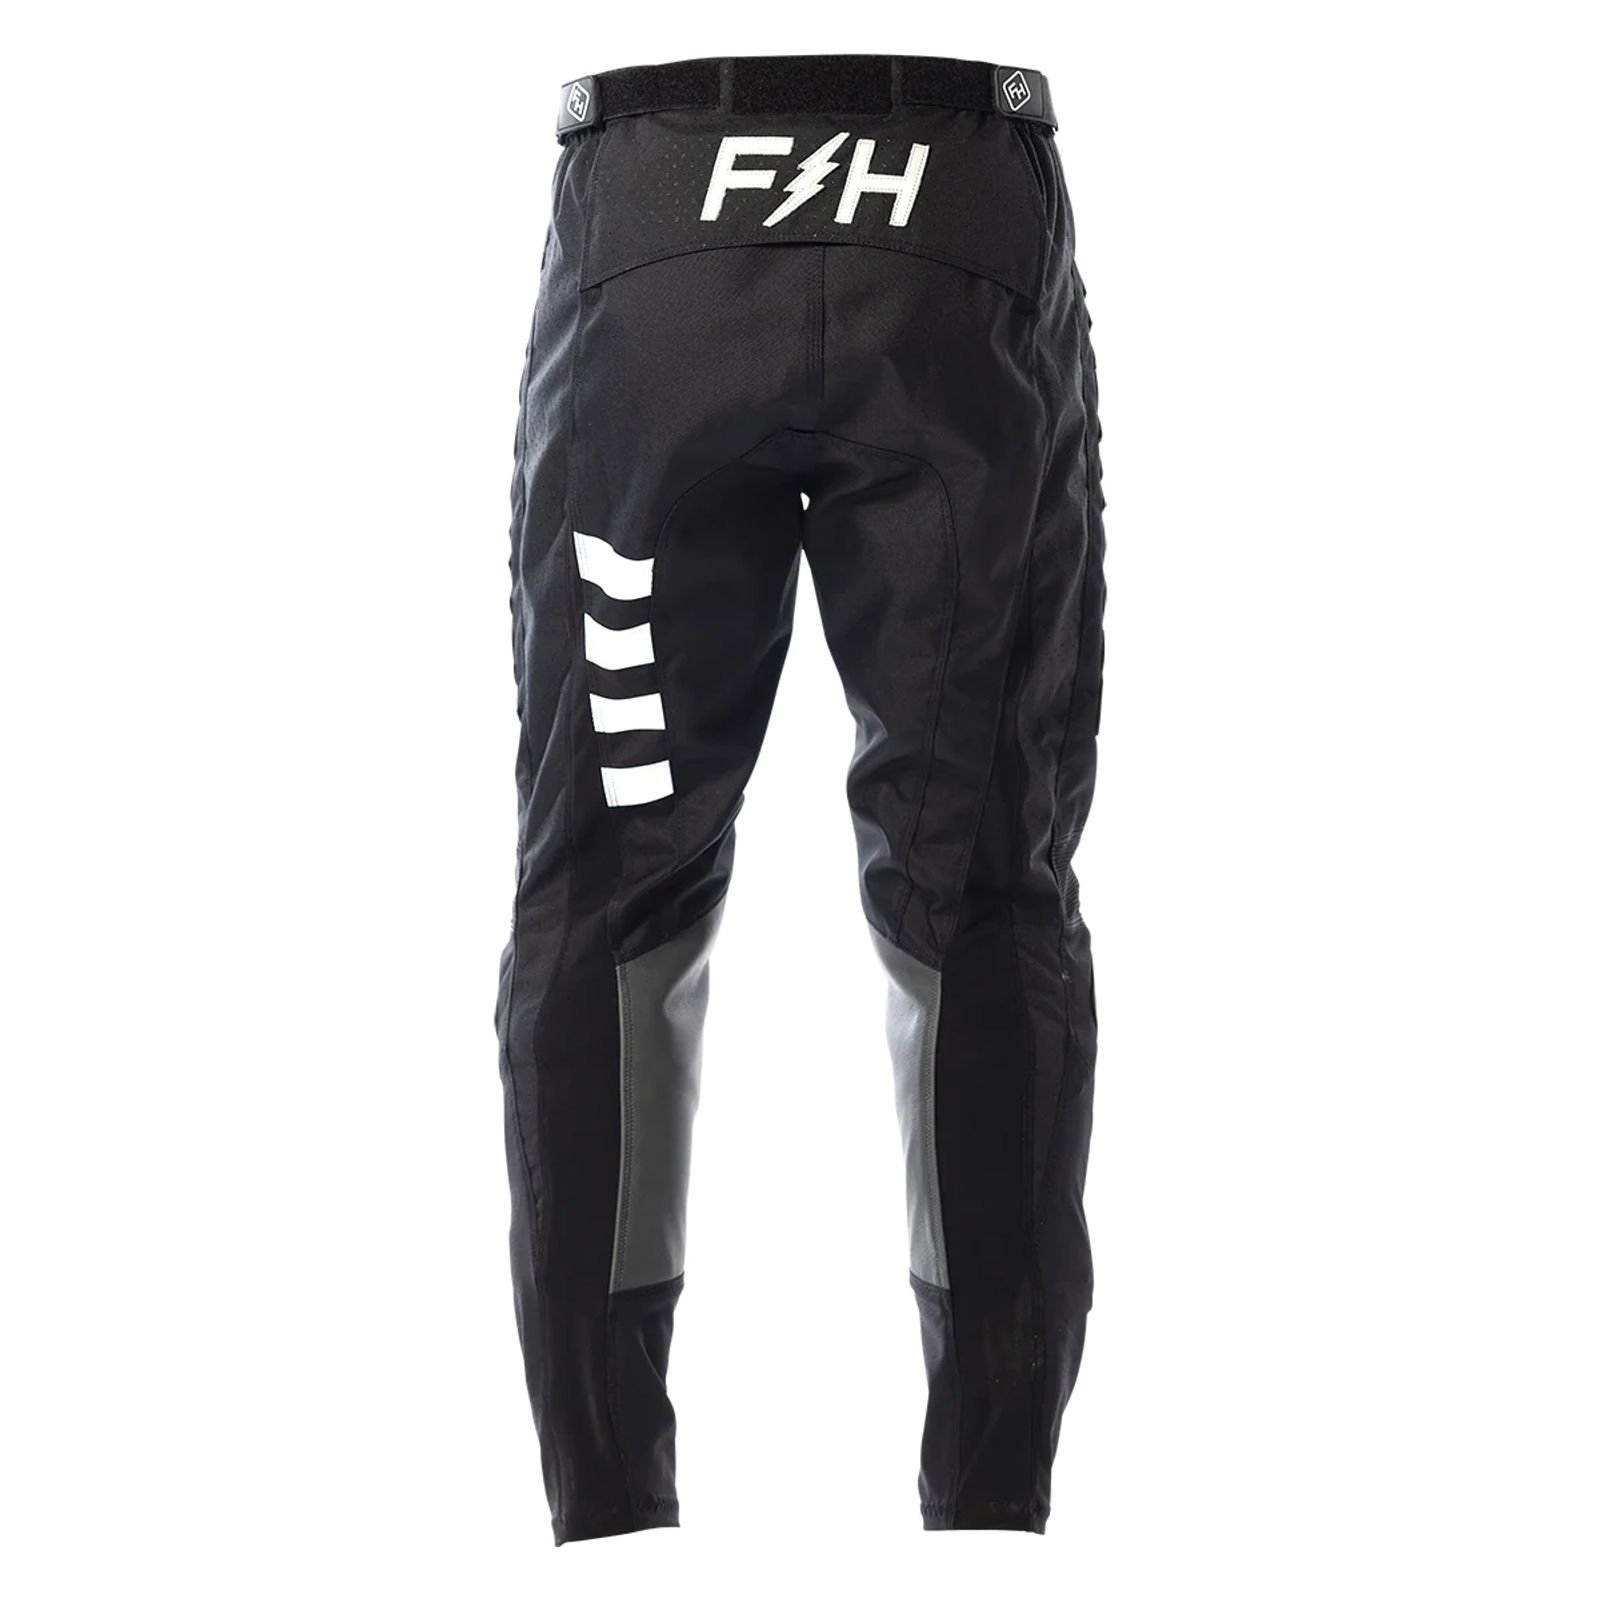 Fasthouse Grindhouse Pant (Black)